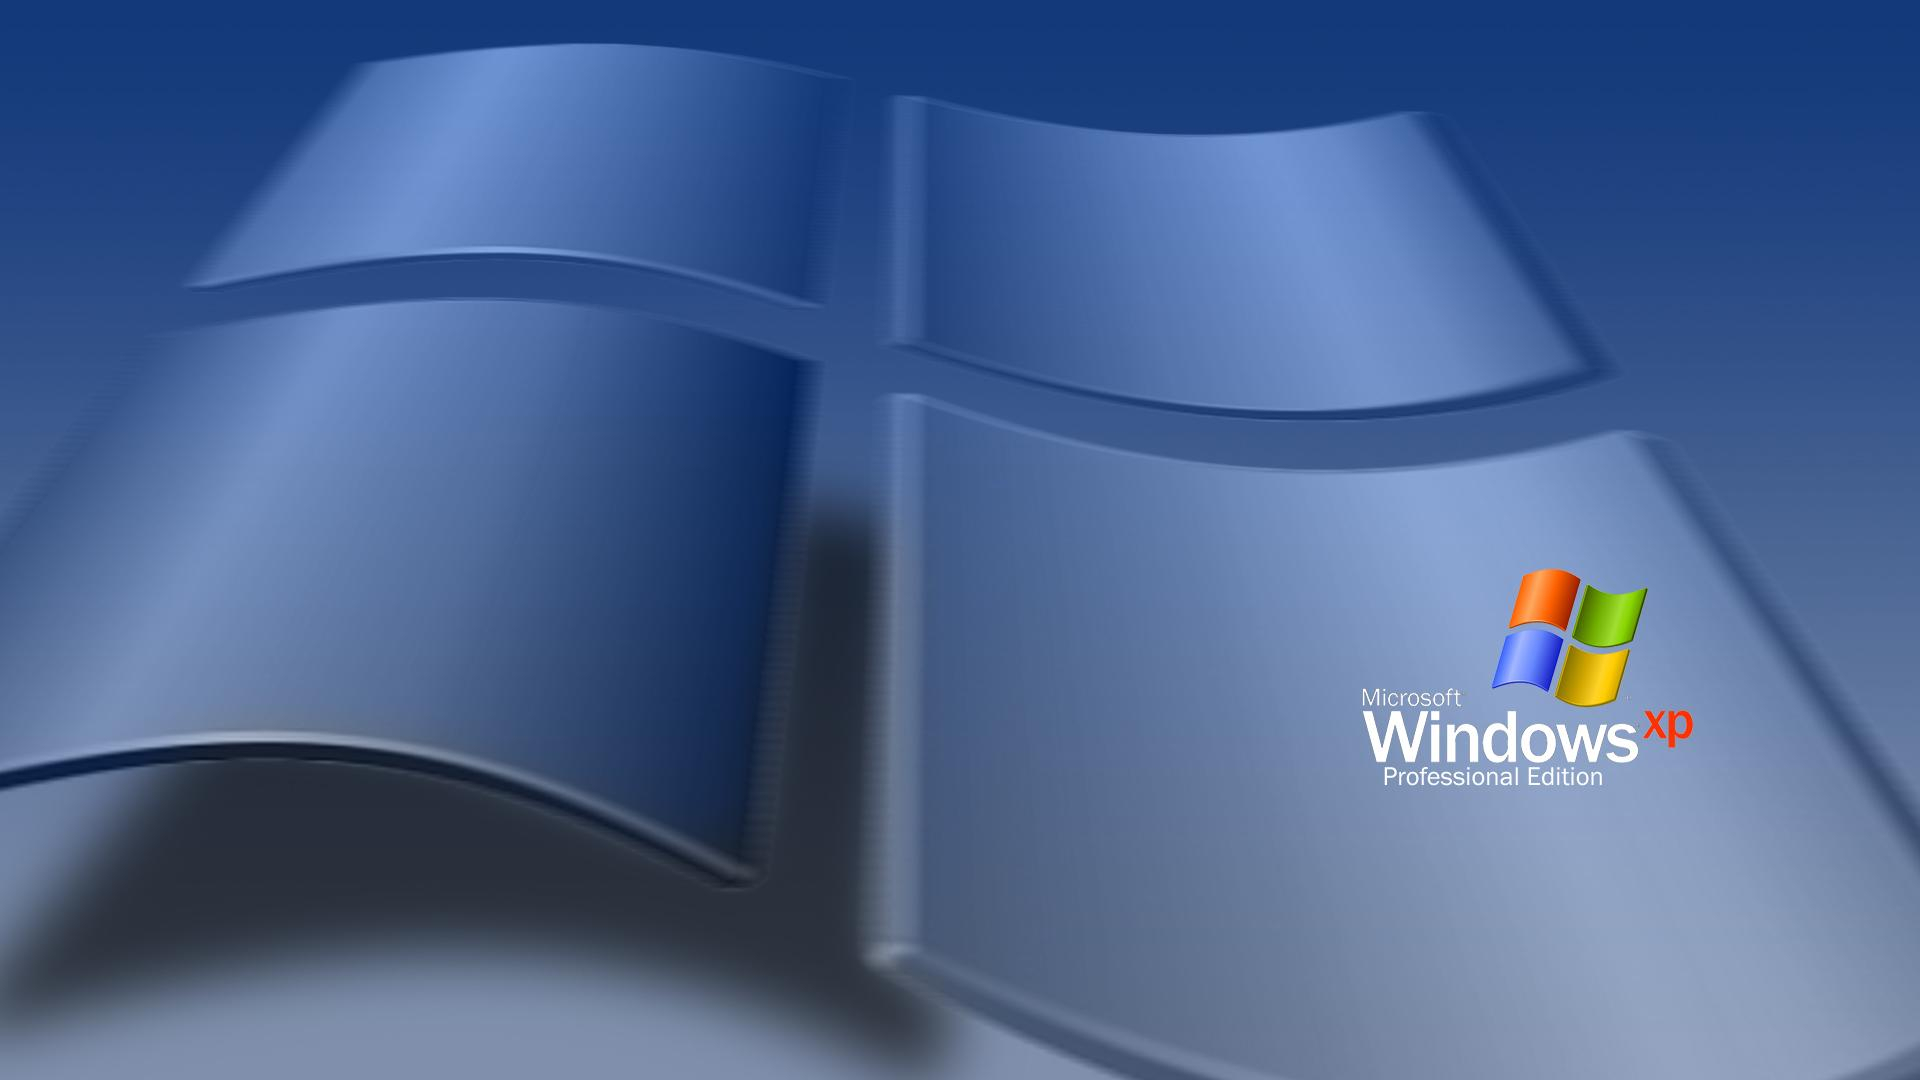 1920x1080 Windows XP Professional Wallpapers Top Free Windows XP Professional Backgrounds